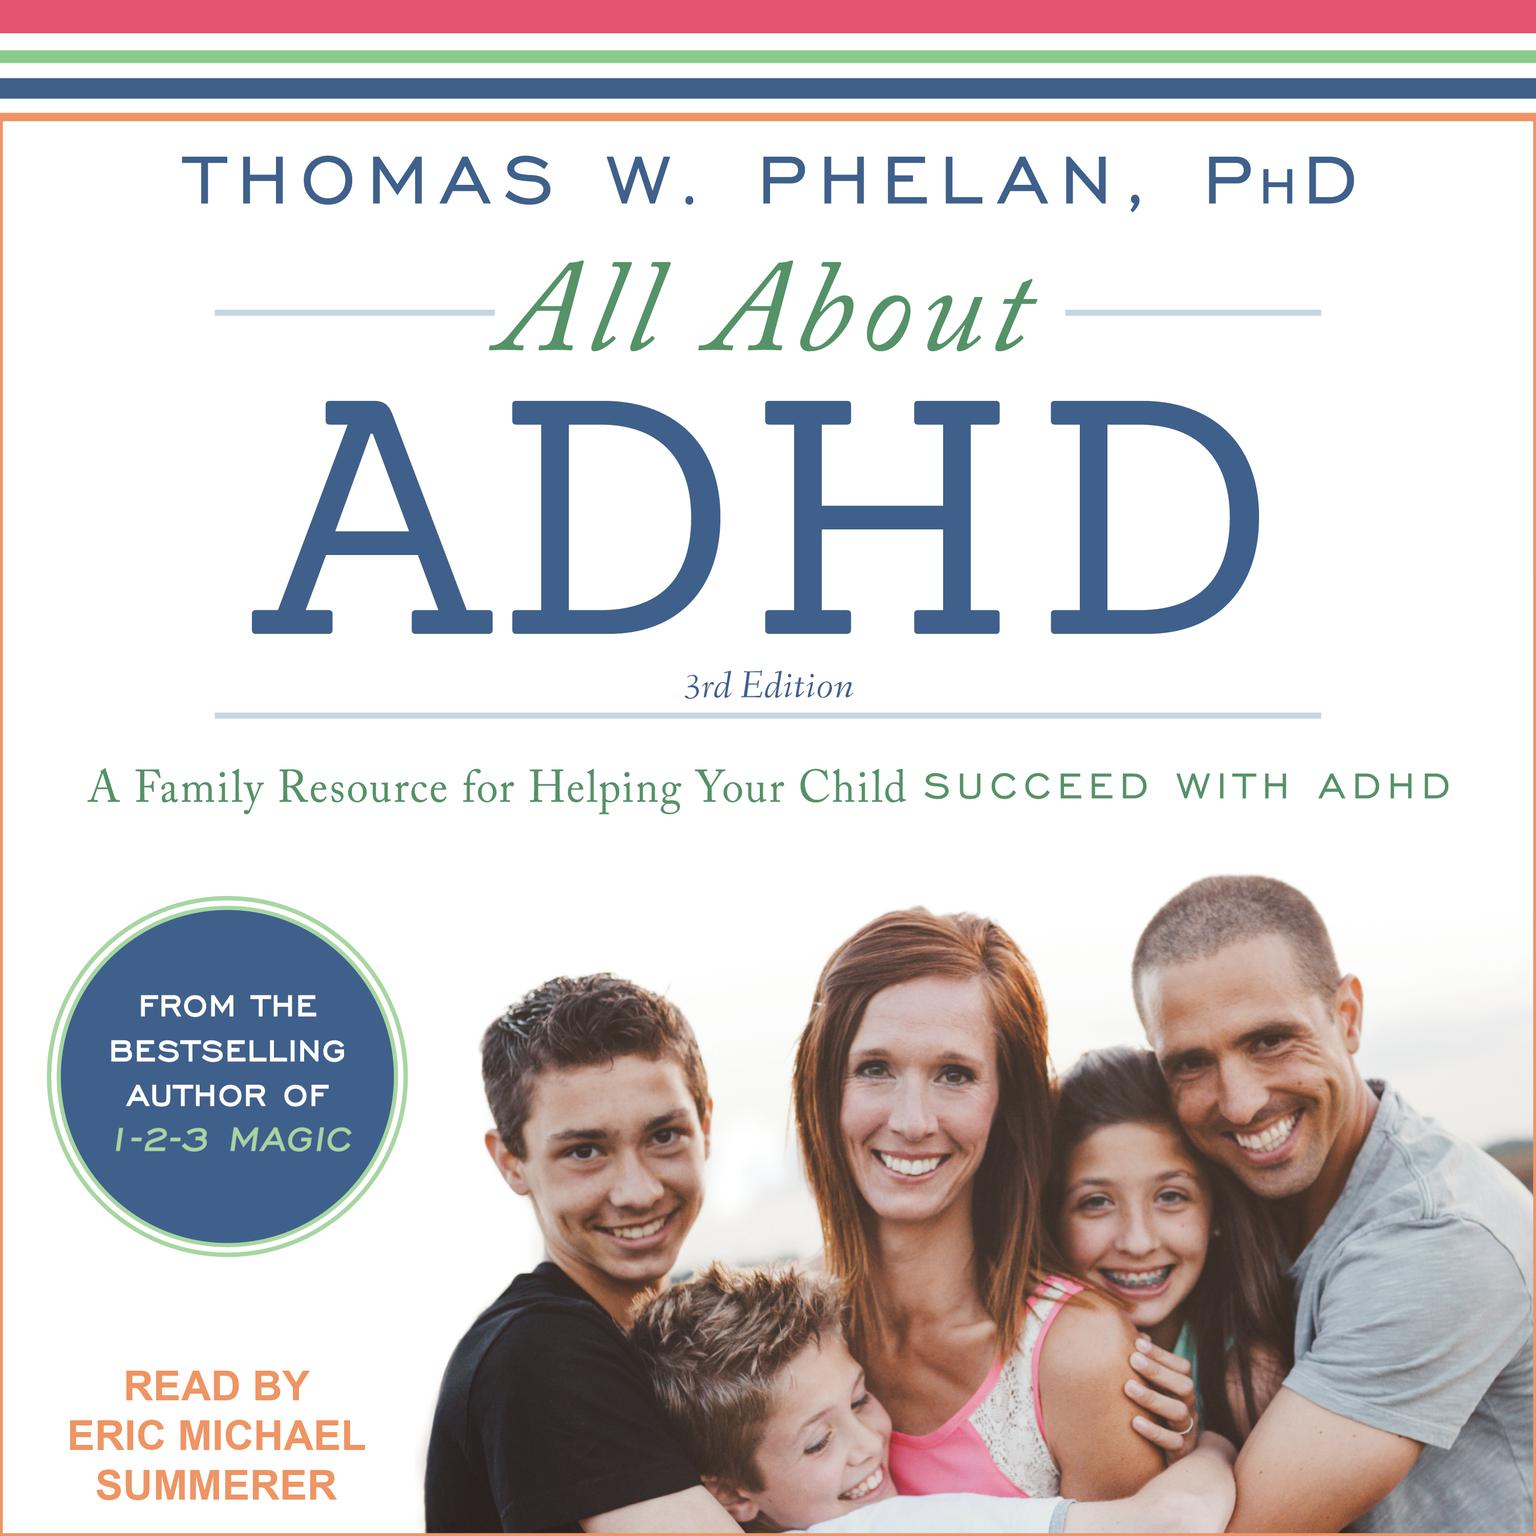 All About ADHD: A Family Resource for Helping Your Child Succeed with ADHD Audiobook, by Thomas W. Phelan